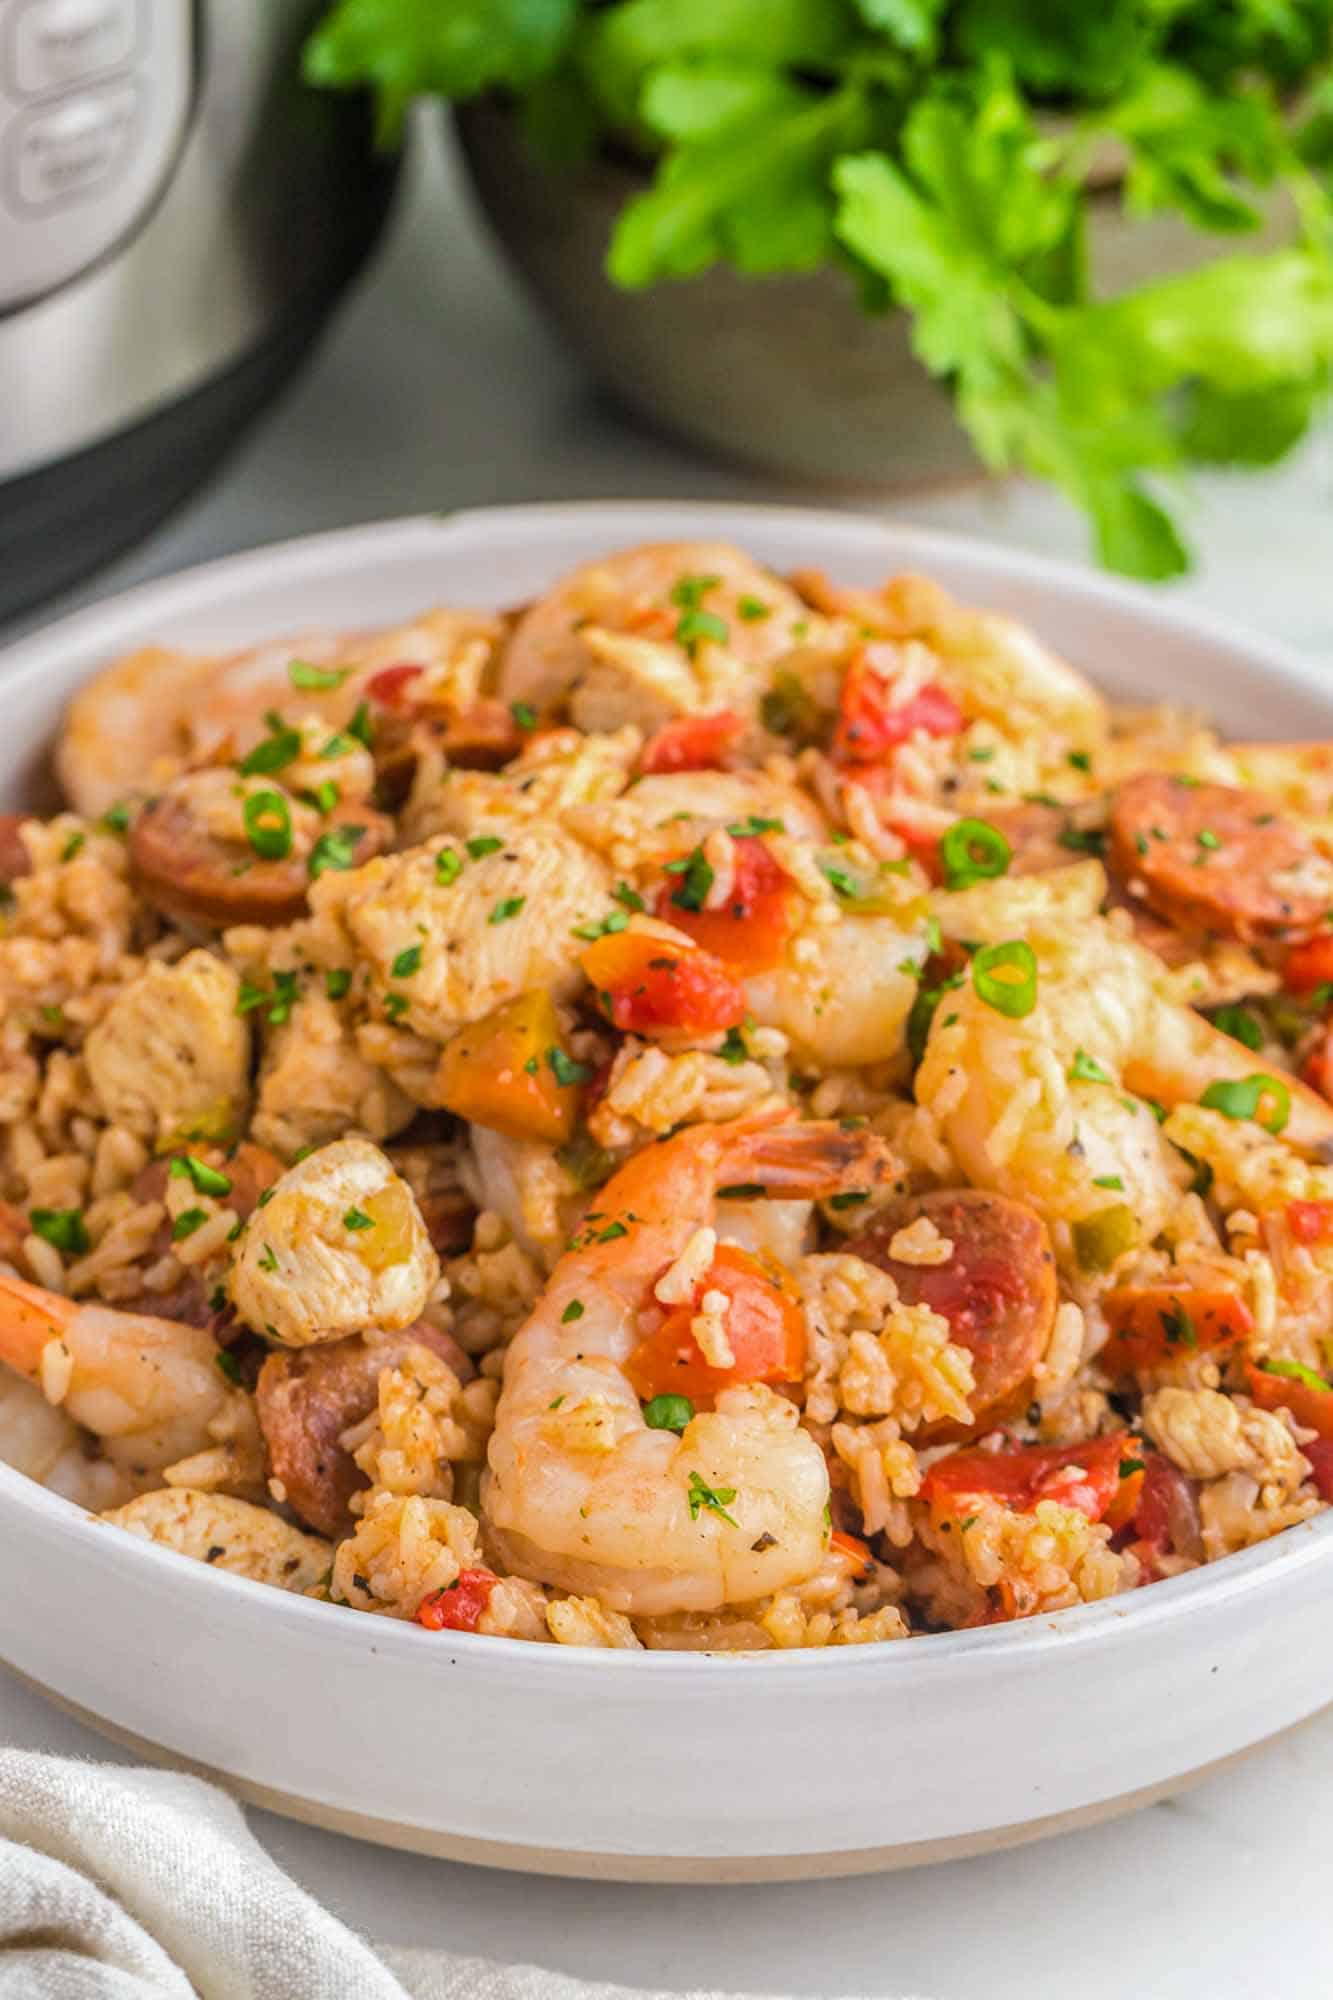 Instant Pot jambalaya in a large white bowl, served.